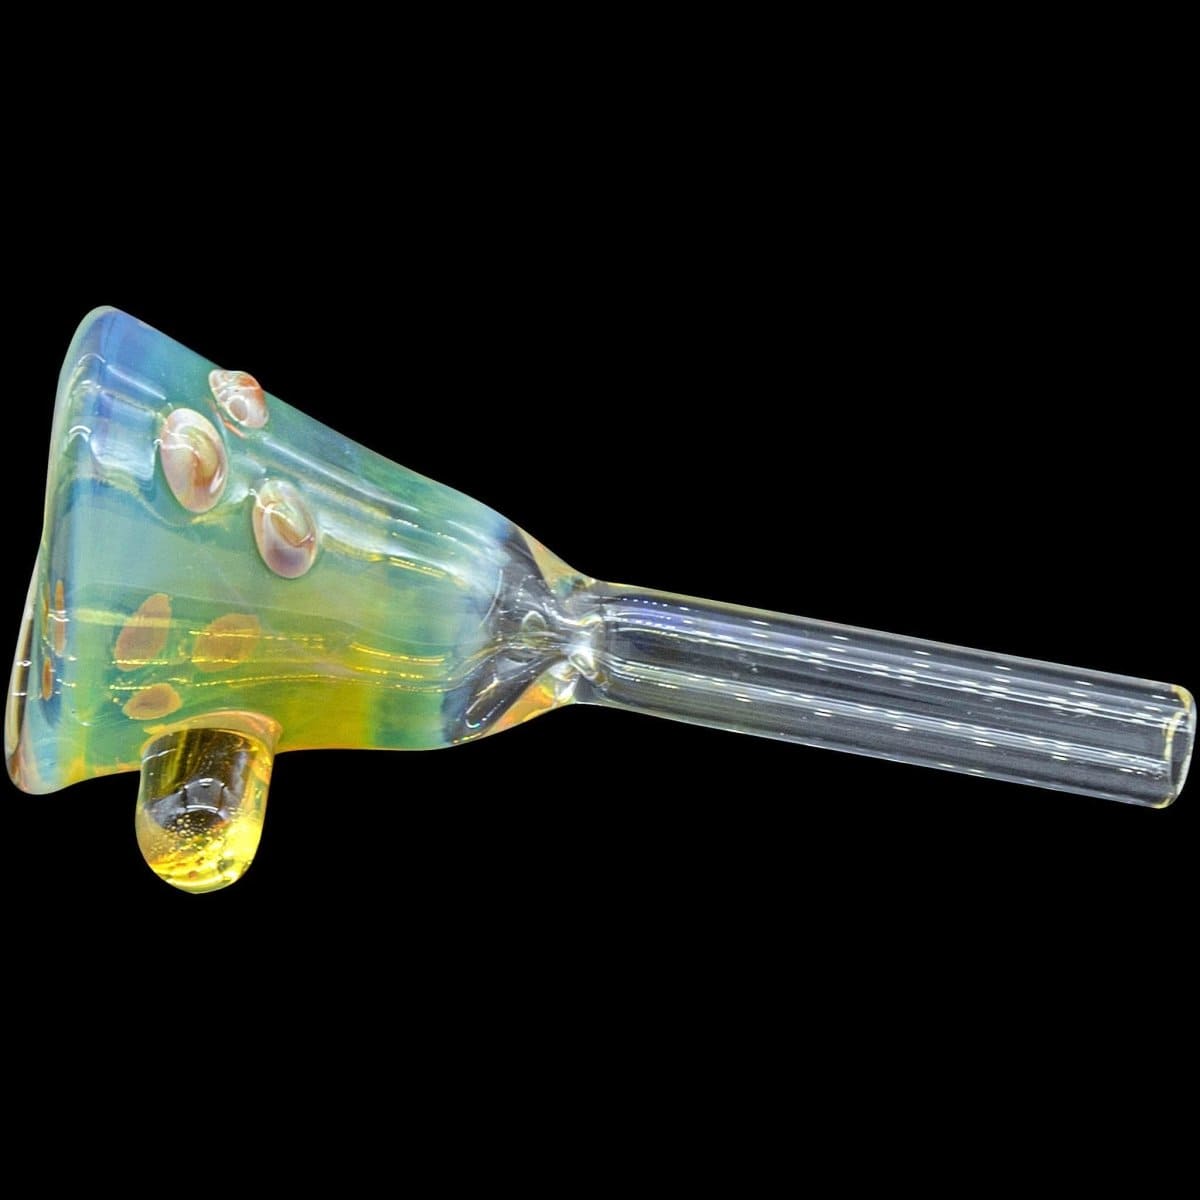 LA Pipes Smoking Accessory "Mission Bell" Pull-Stem Slide Bowl